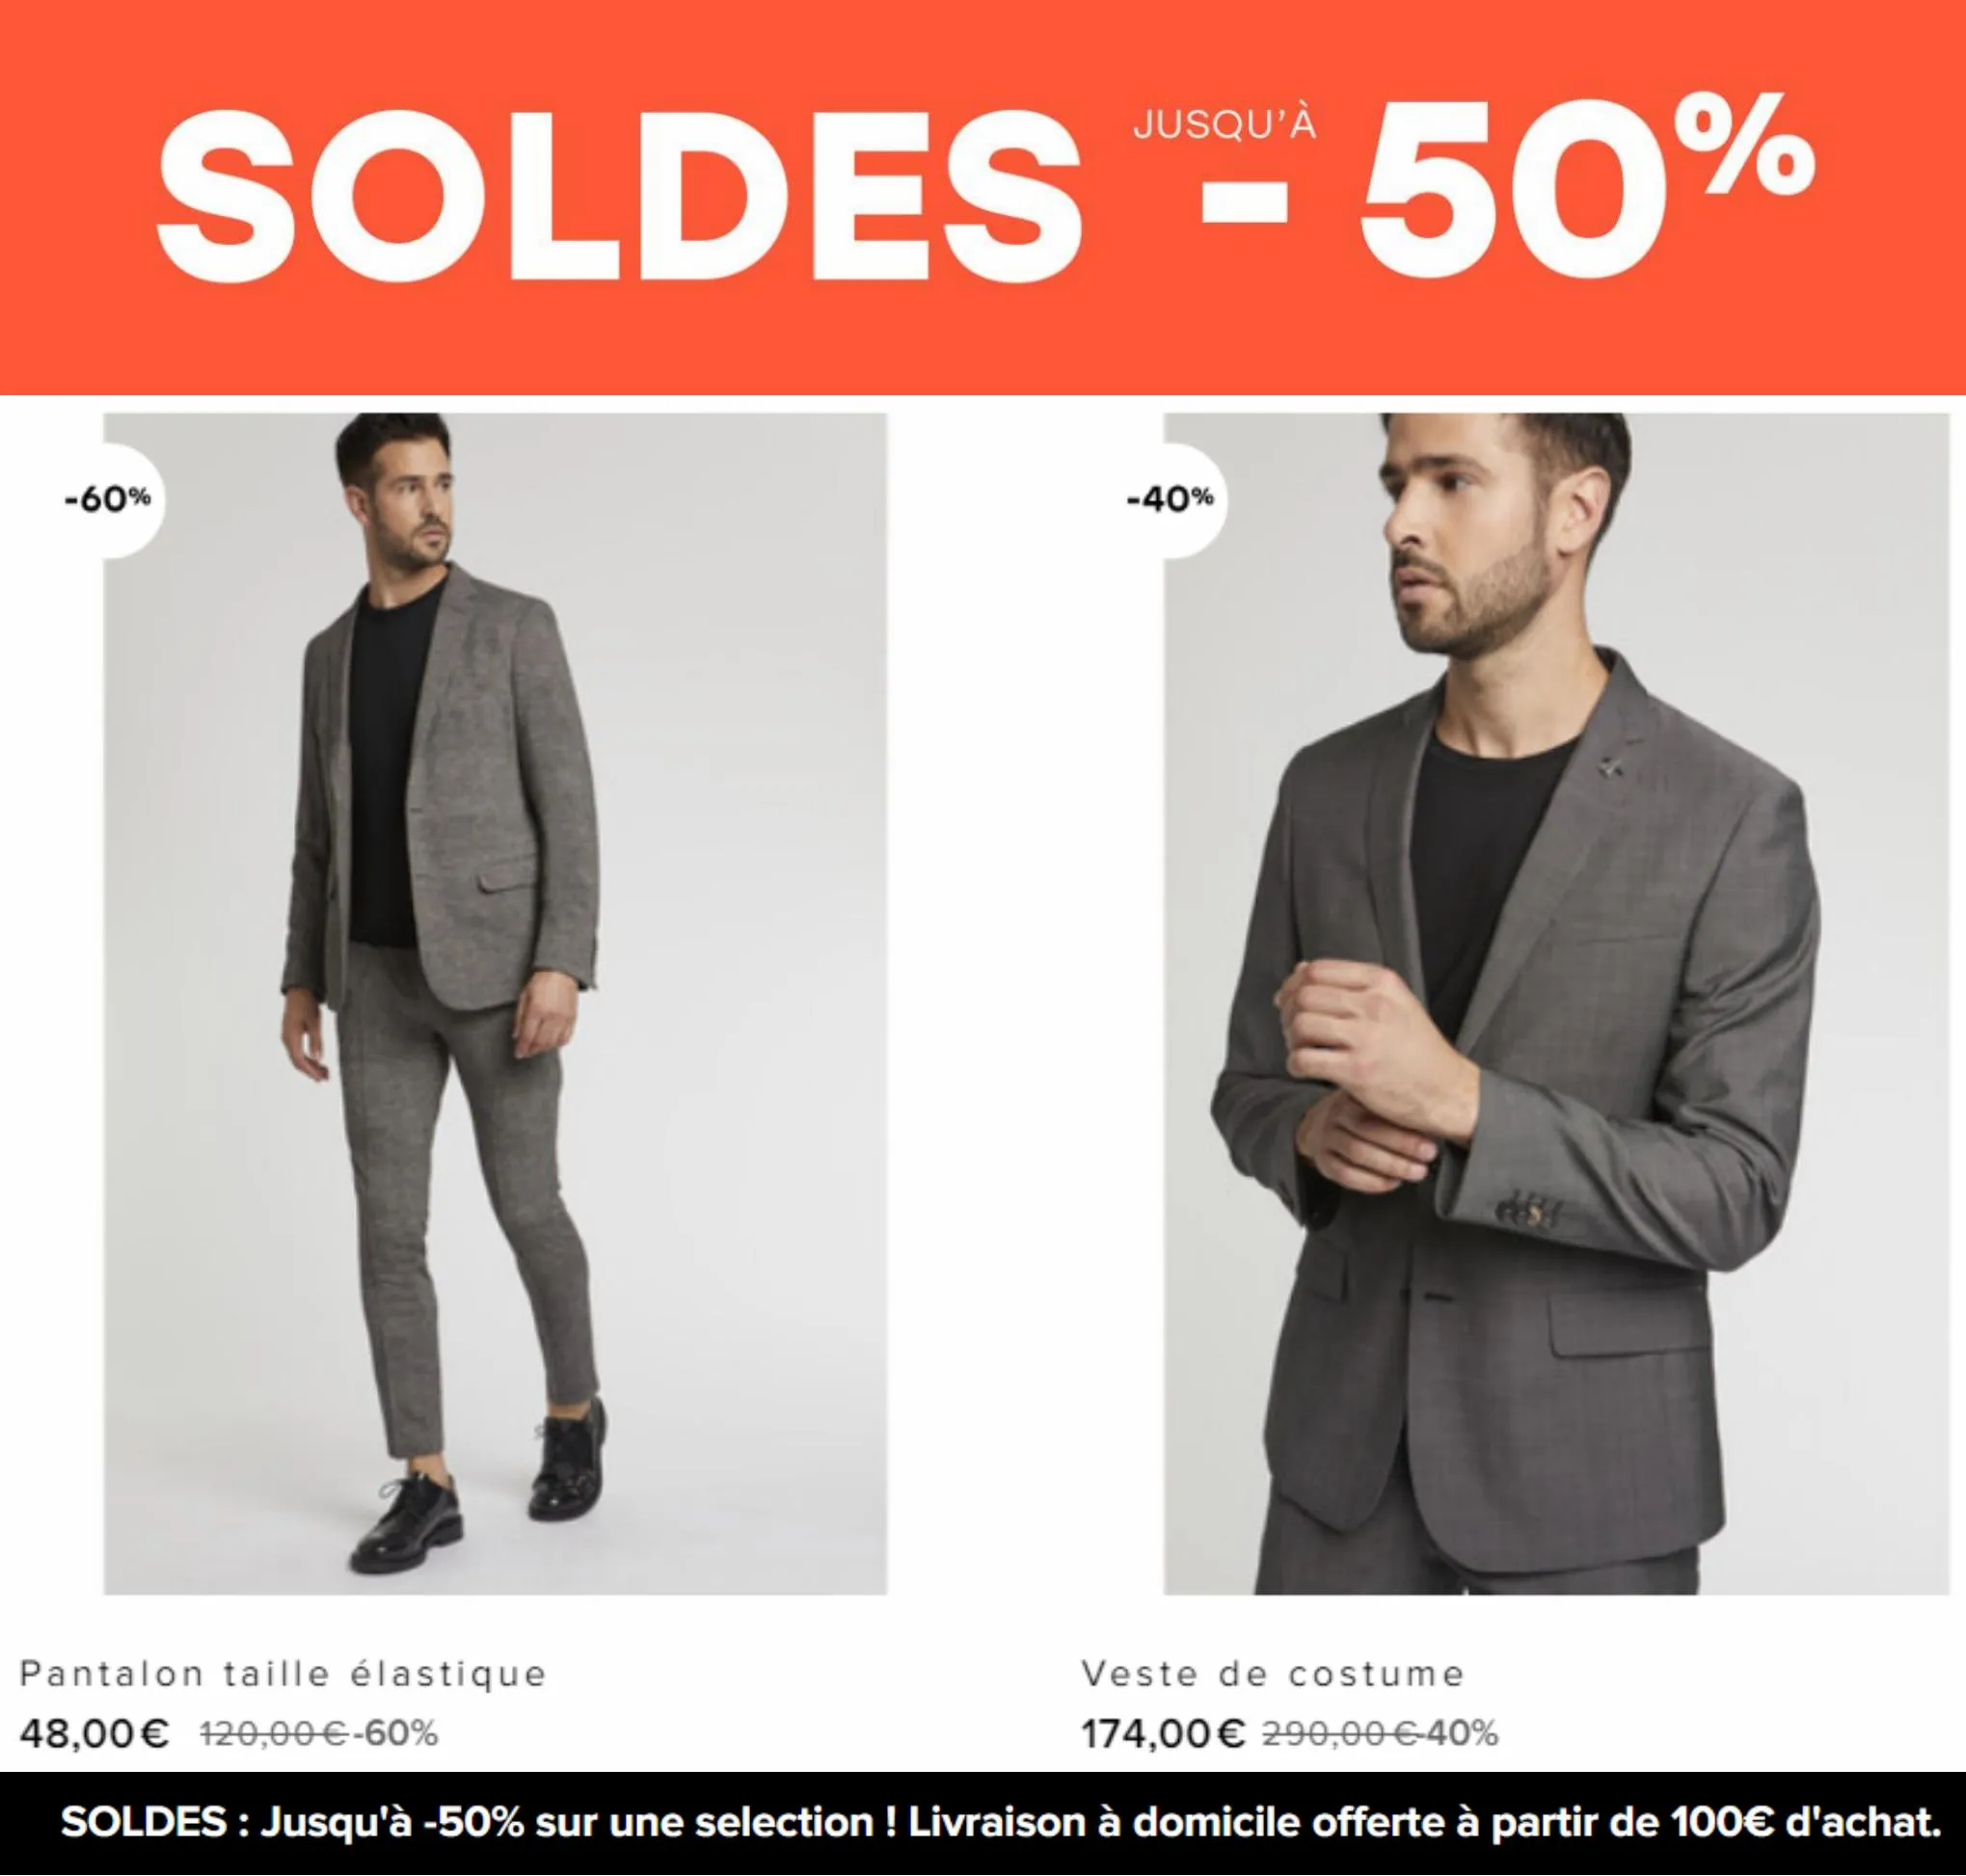 Catalogue Soldes -50% Homme, page 00008